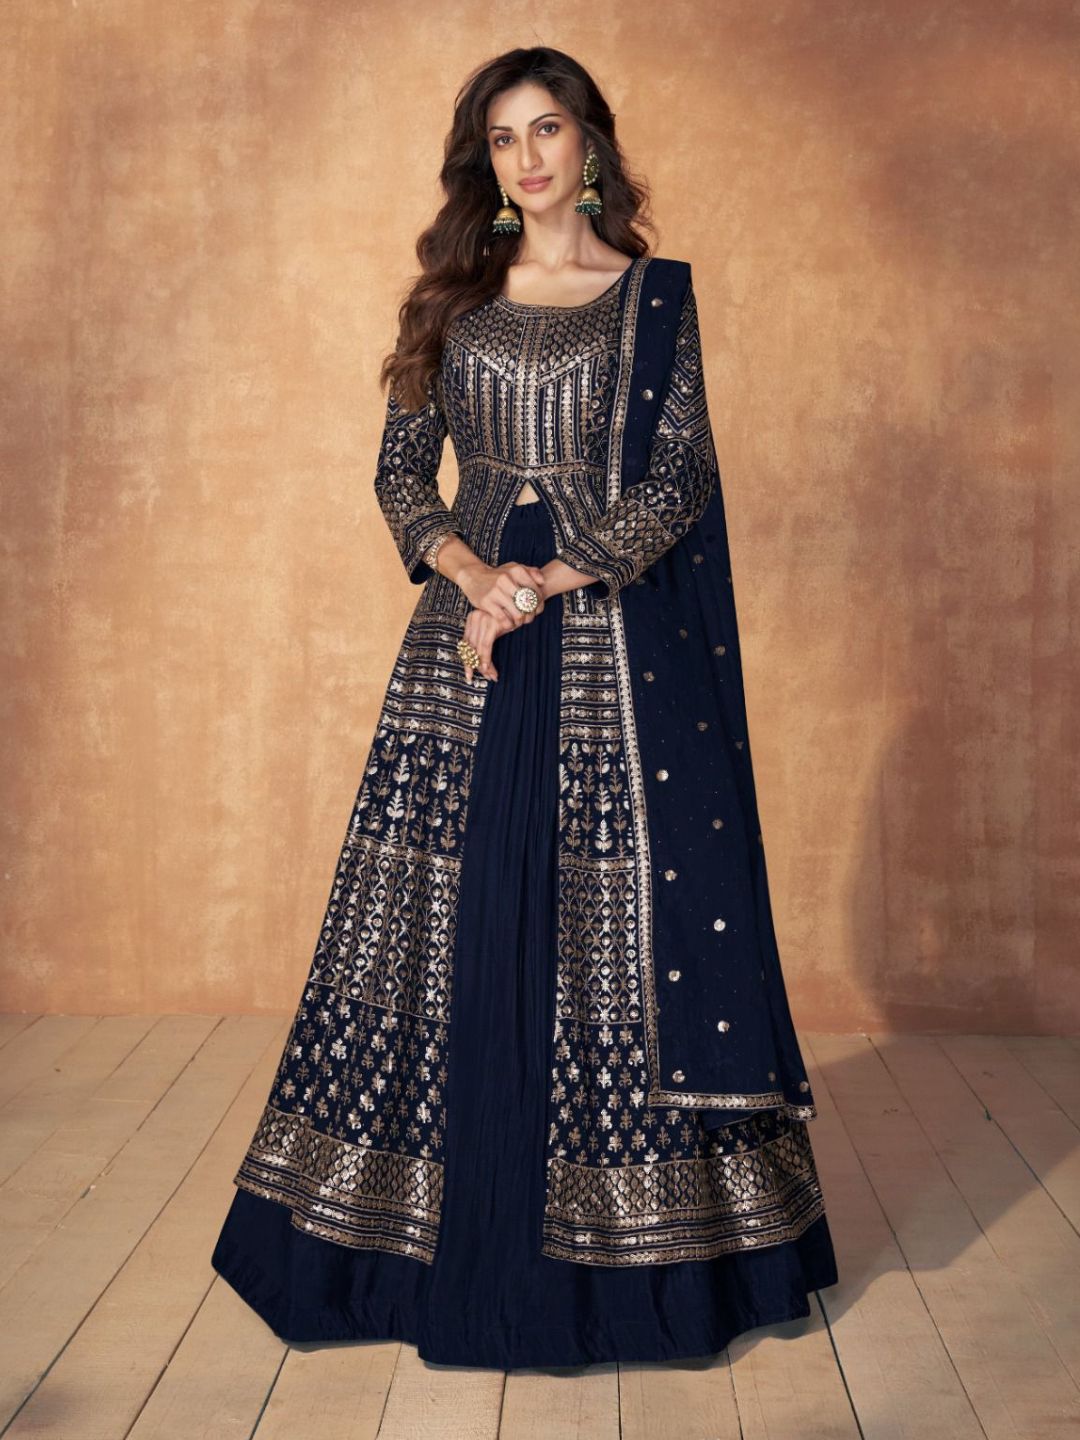 Georgette Embroidered Bollywood Salwar Kameez in Blue with Stone work-81975-1